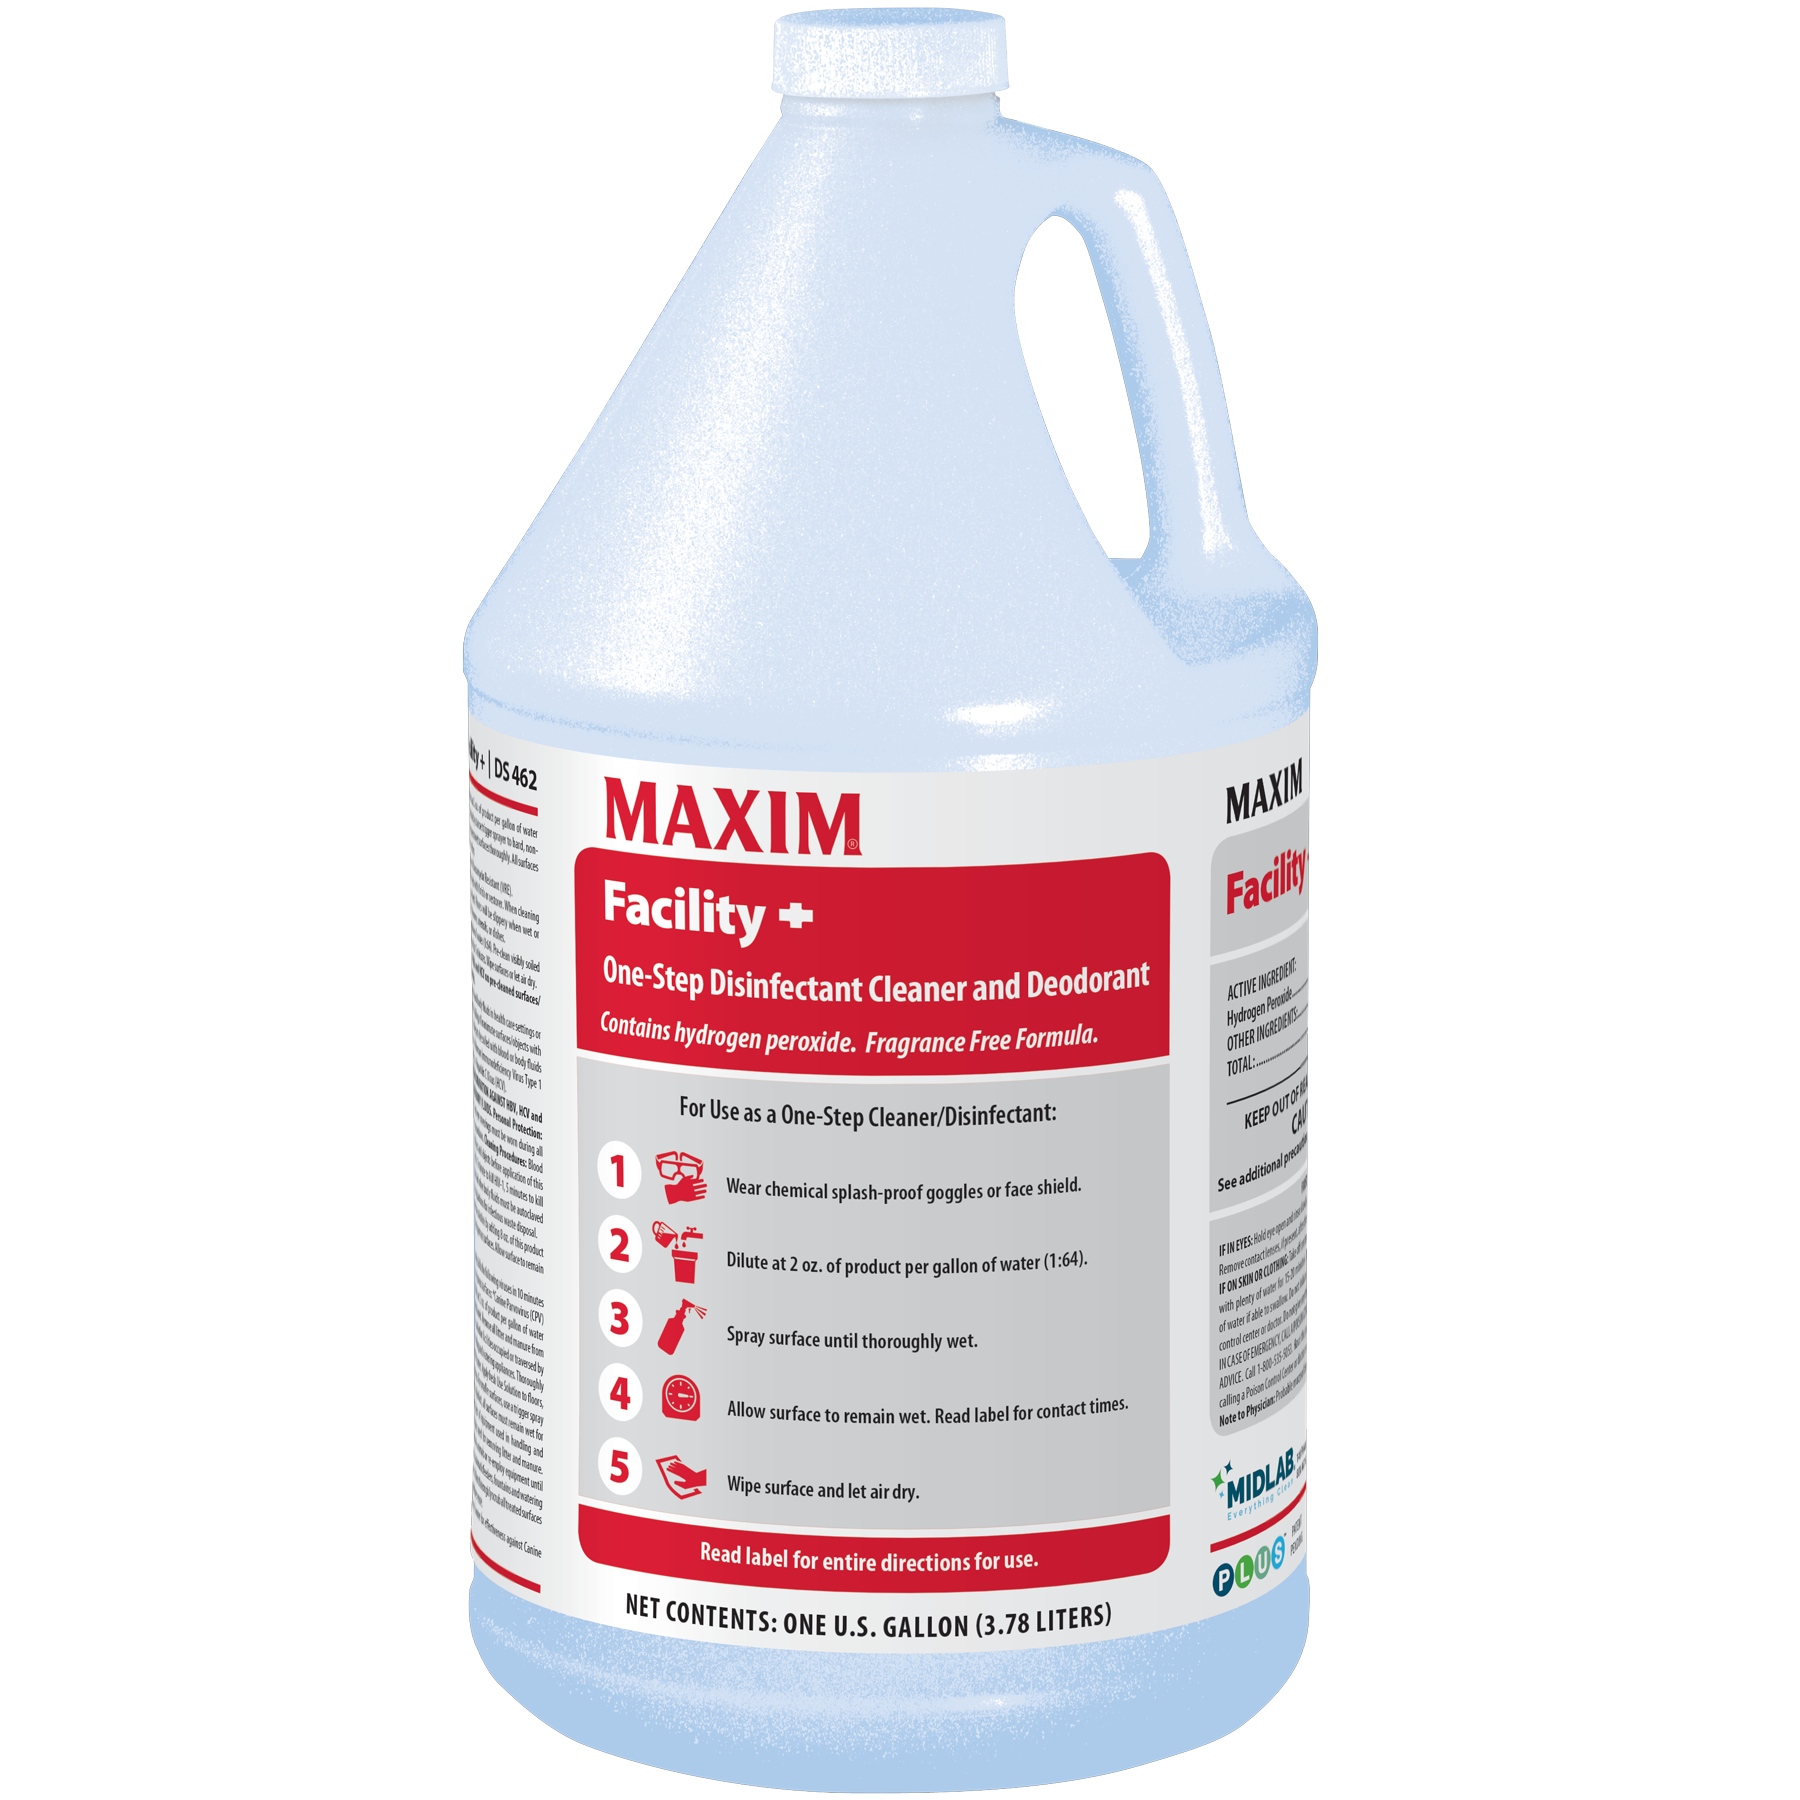 Maxim Facility + Gallon Disinfectant Cleaner 4/case